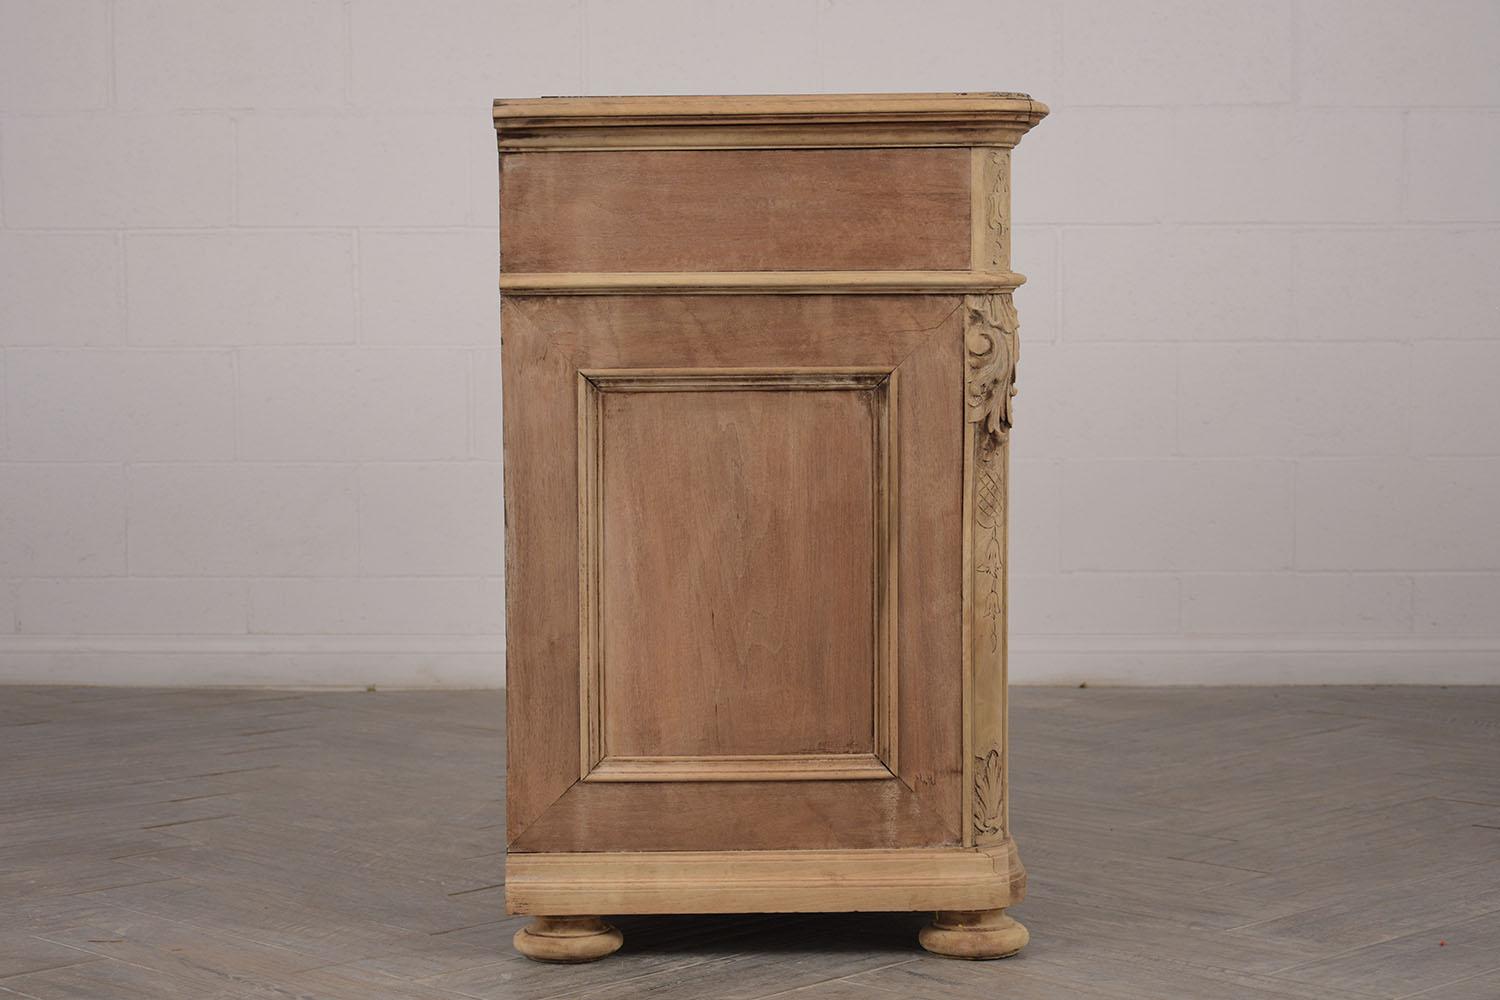 This is a 1880s French server or cabinet. Made from walnut wood, that has been bleached to show its natural wood color. Features an inserted black marble top with white veins. Top single long drawer with brass design handle and keyhole. Followed by